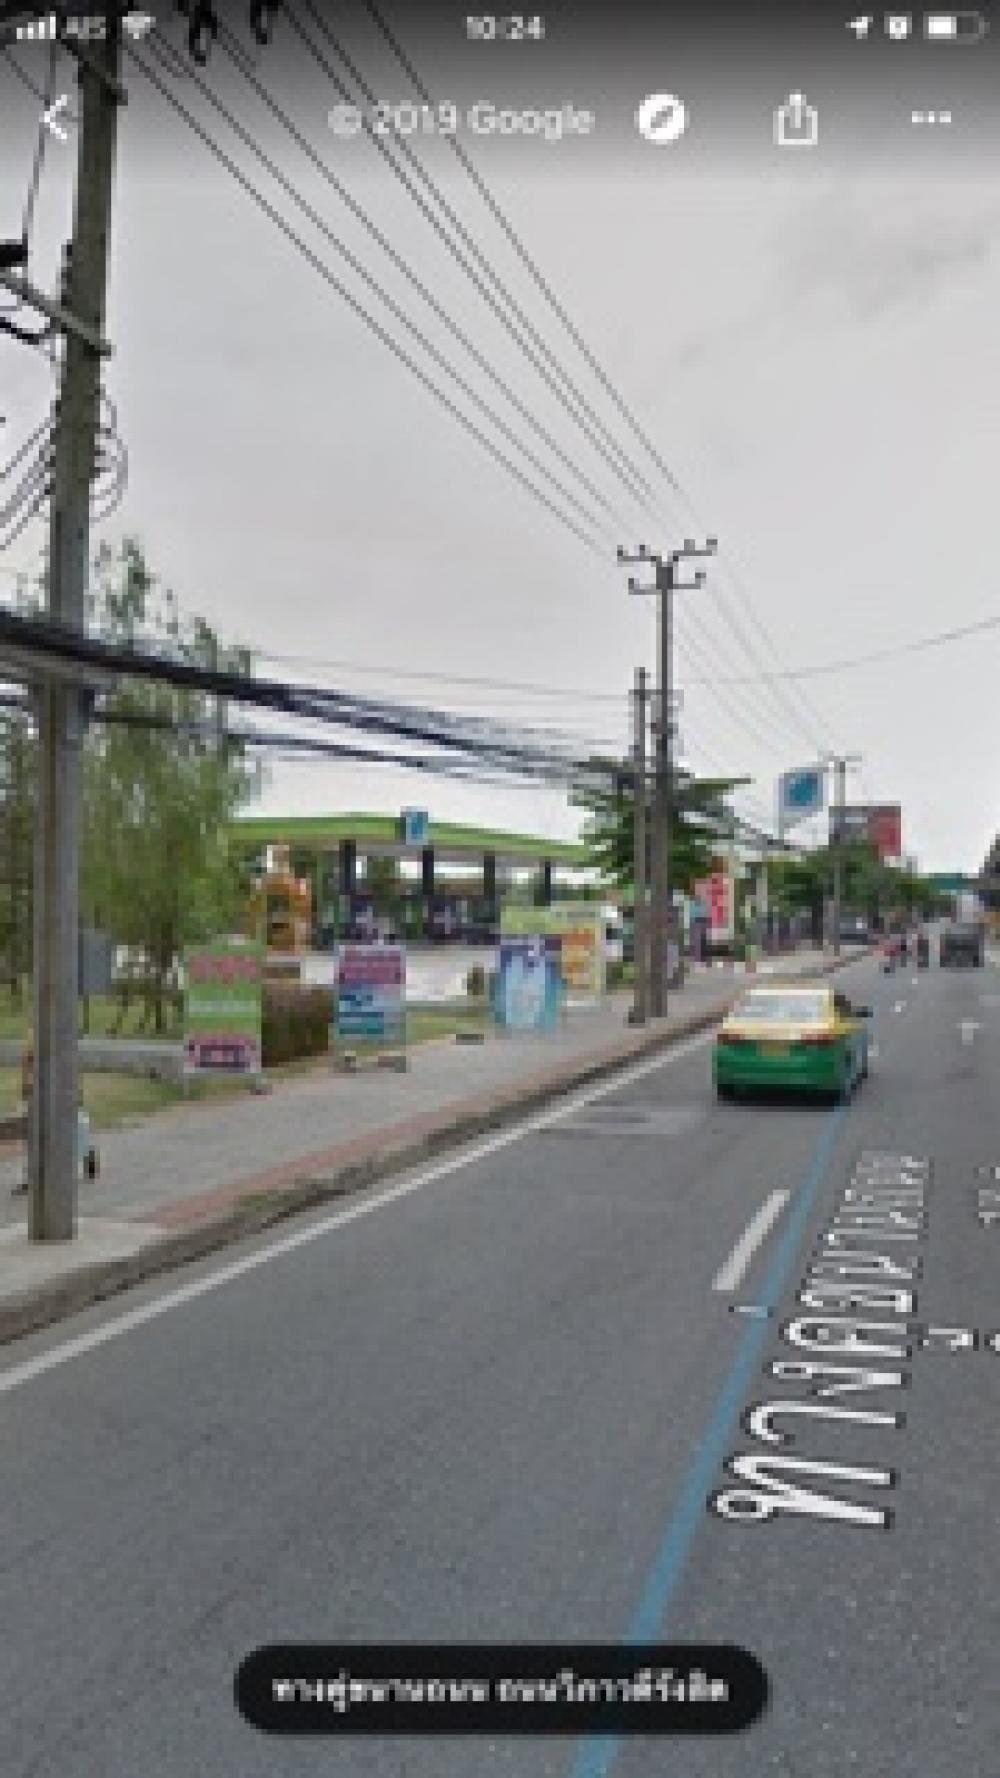 For RentLandVipawadee, Don Mueang, Lak Si : Land for rent, 2 rai, wide frontage, with office buildings and staff housing Near Don Mueang Airport (150 meters away from Vibhavadi Rangsit Road) or share for rent (Land for rent 2 rai near Donmuang Airport)